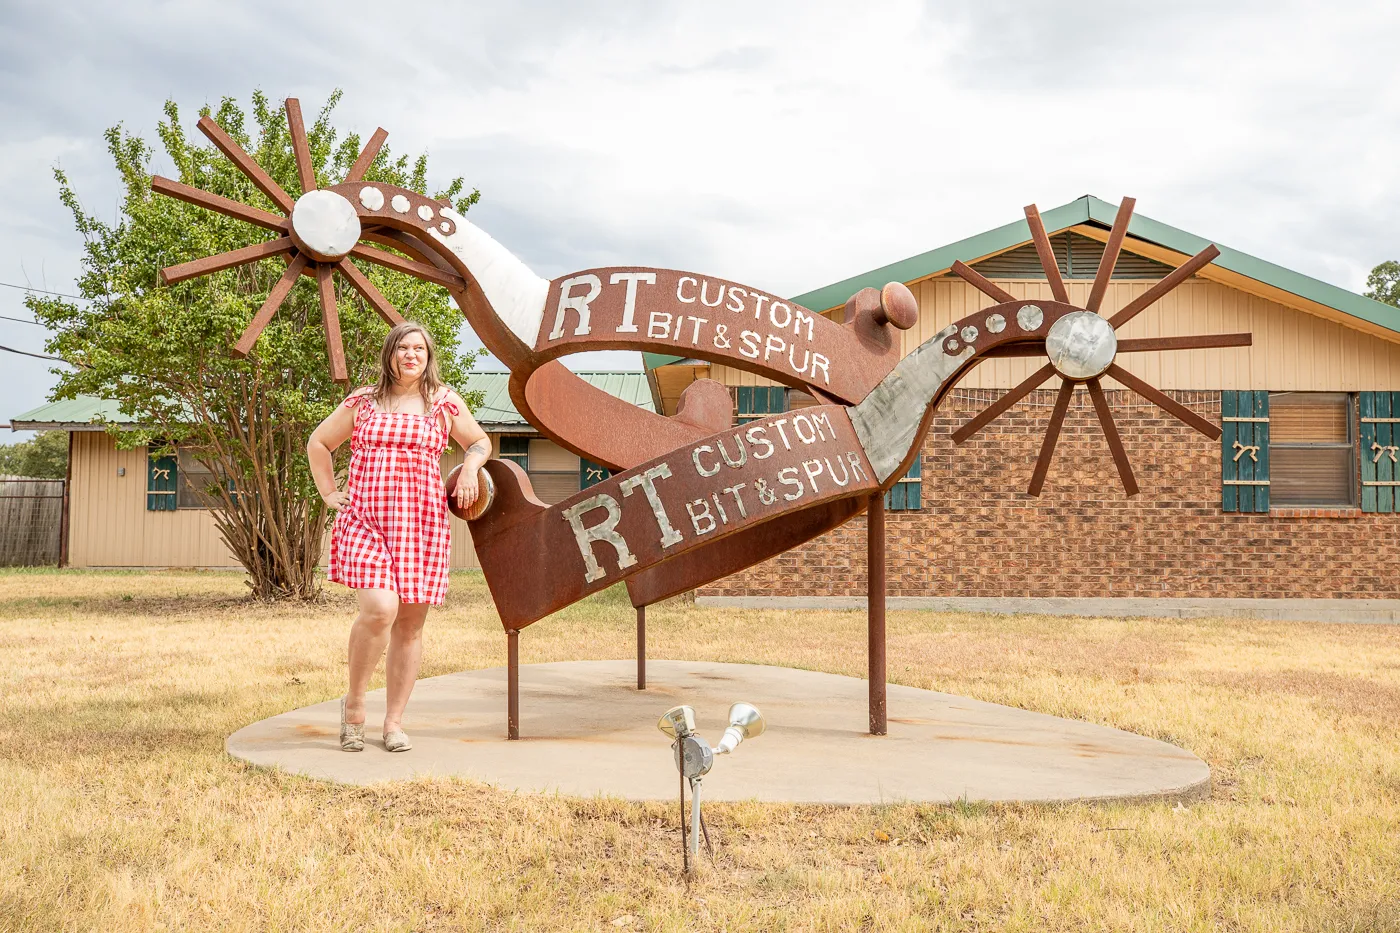 Big Spurs in Gainesville, Texas roadside attraction